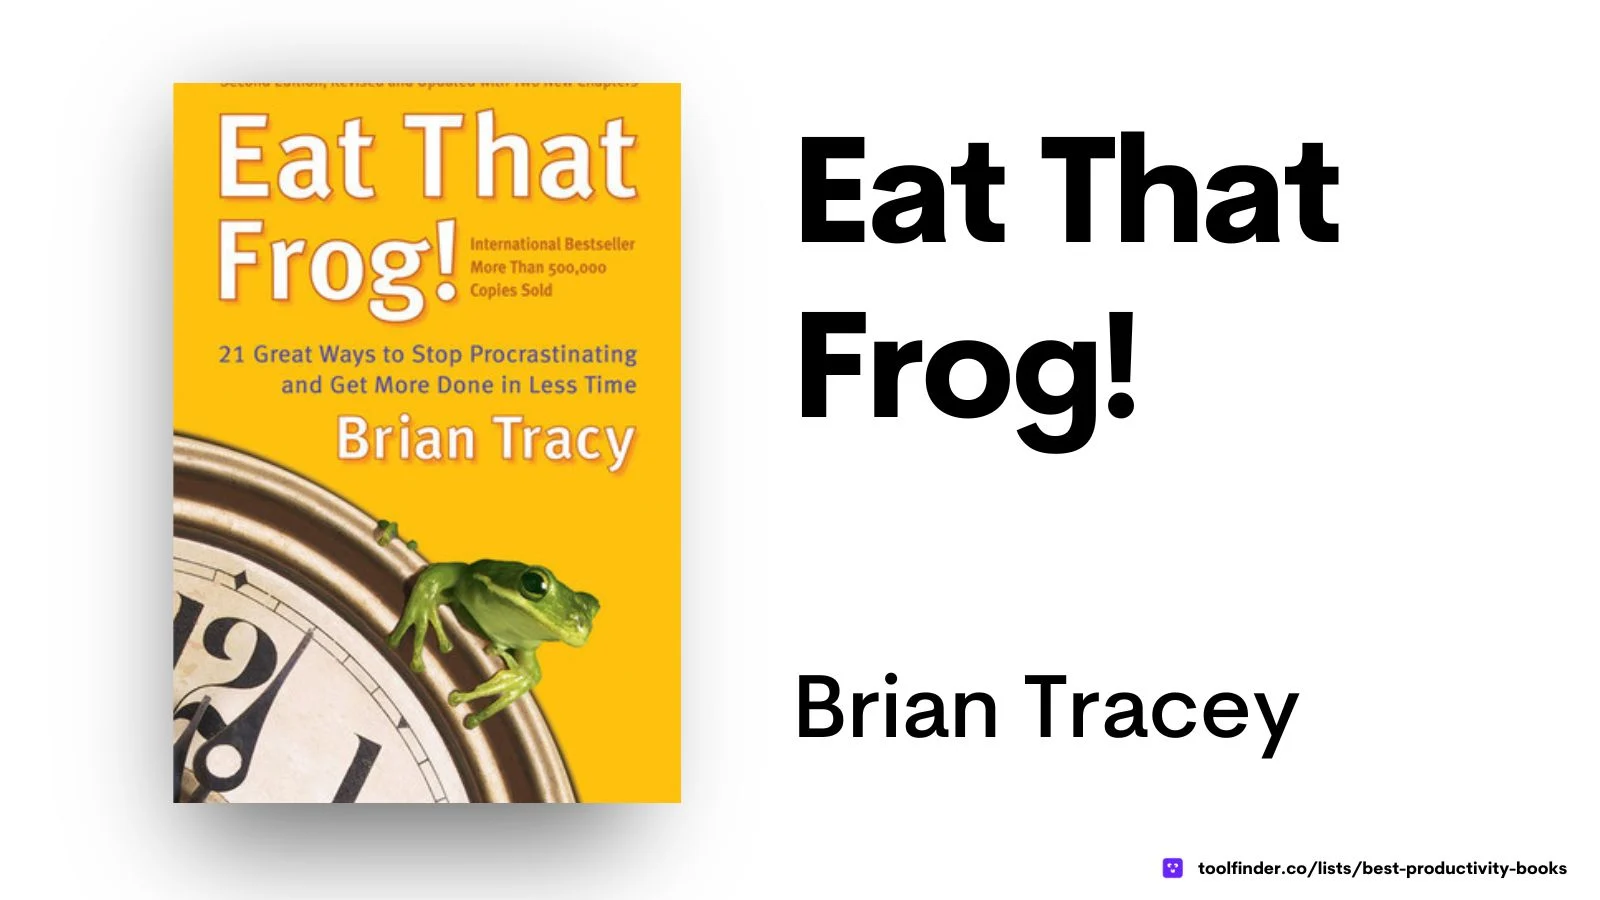 Eat That Frog helps readers better manage their time, tasks and work life balance.